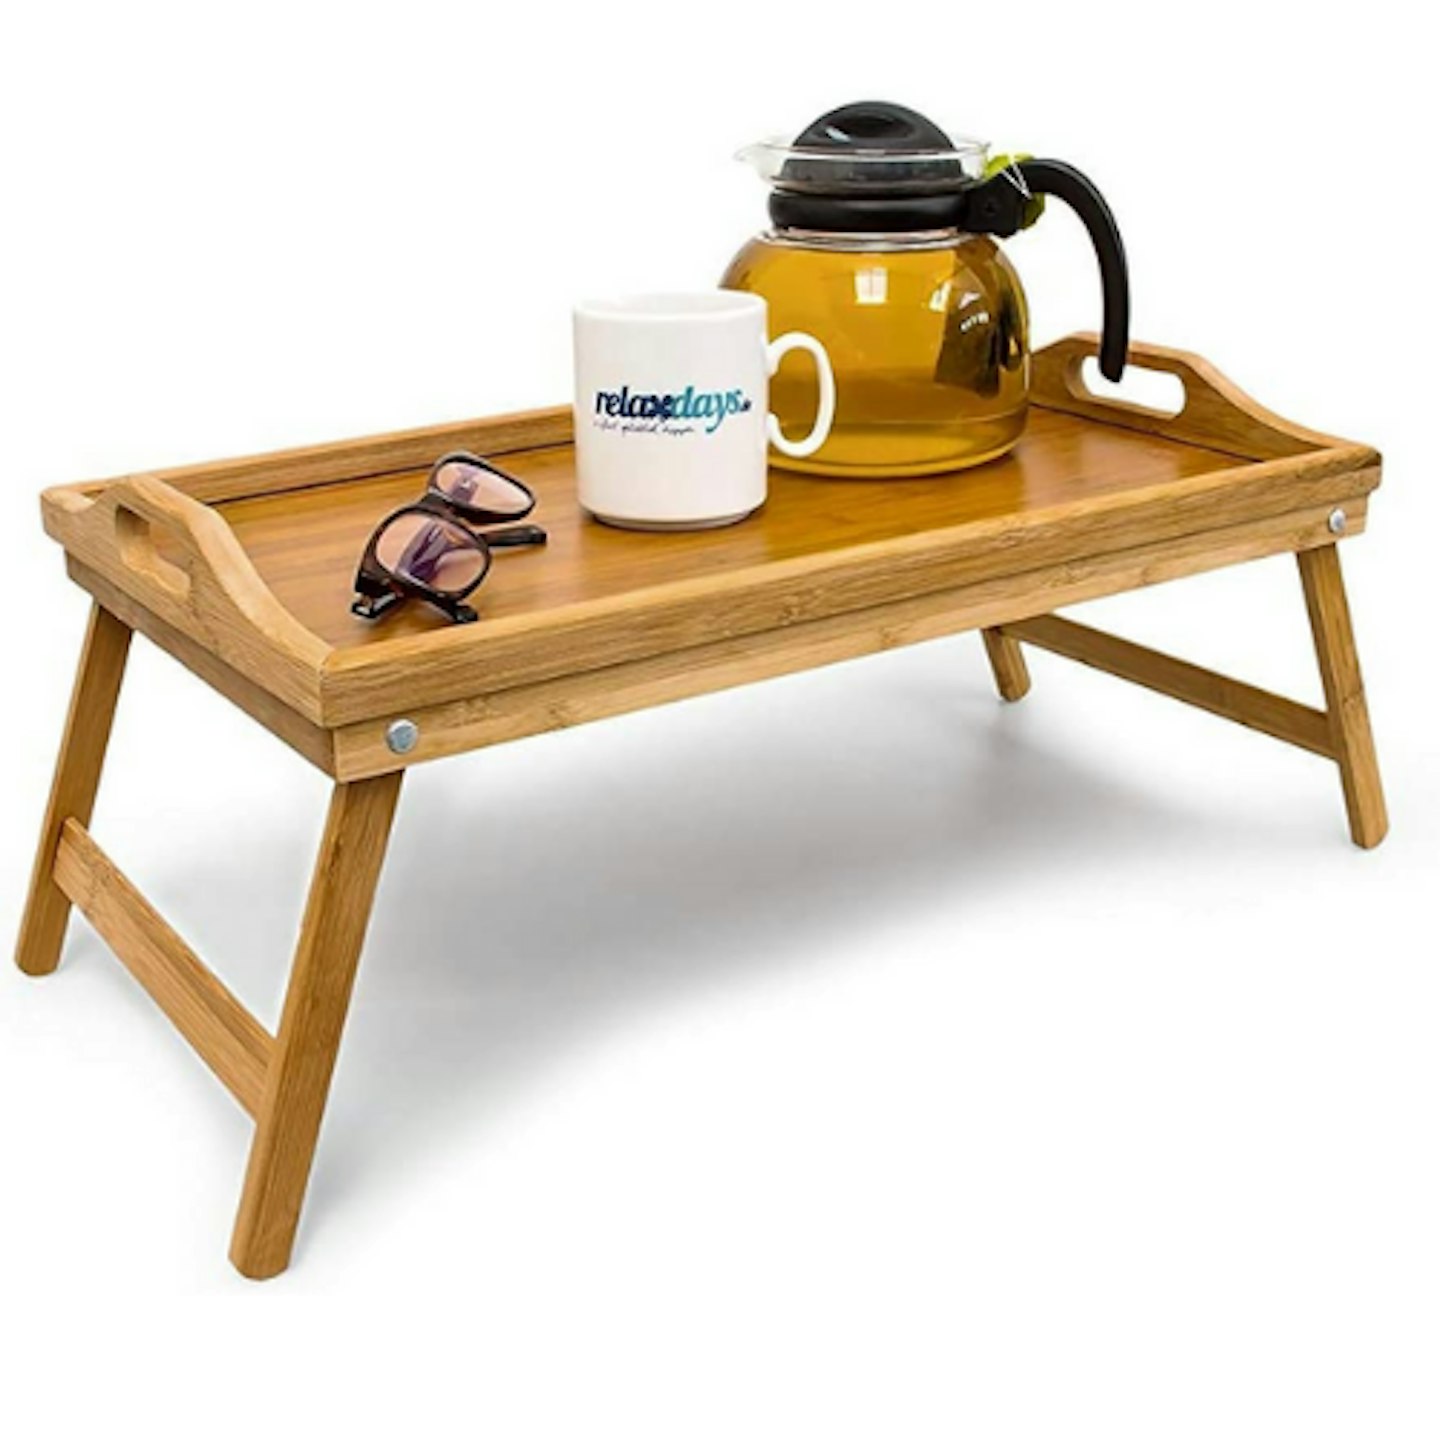 Relaxdays Bamboo Wooden Breakfast in Bed Tray